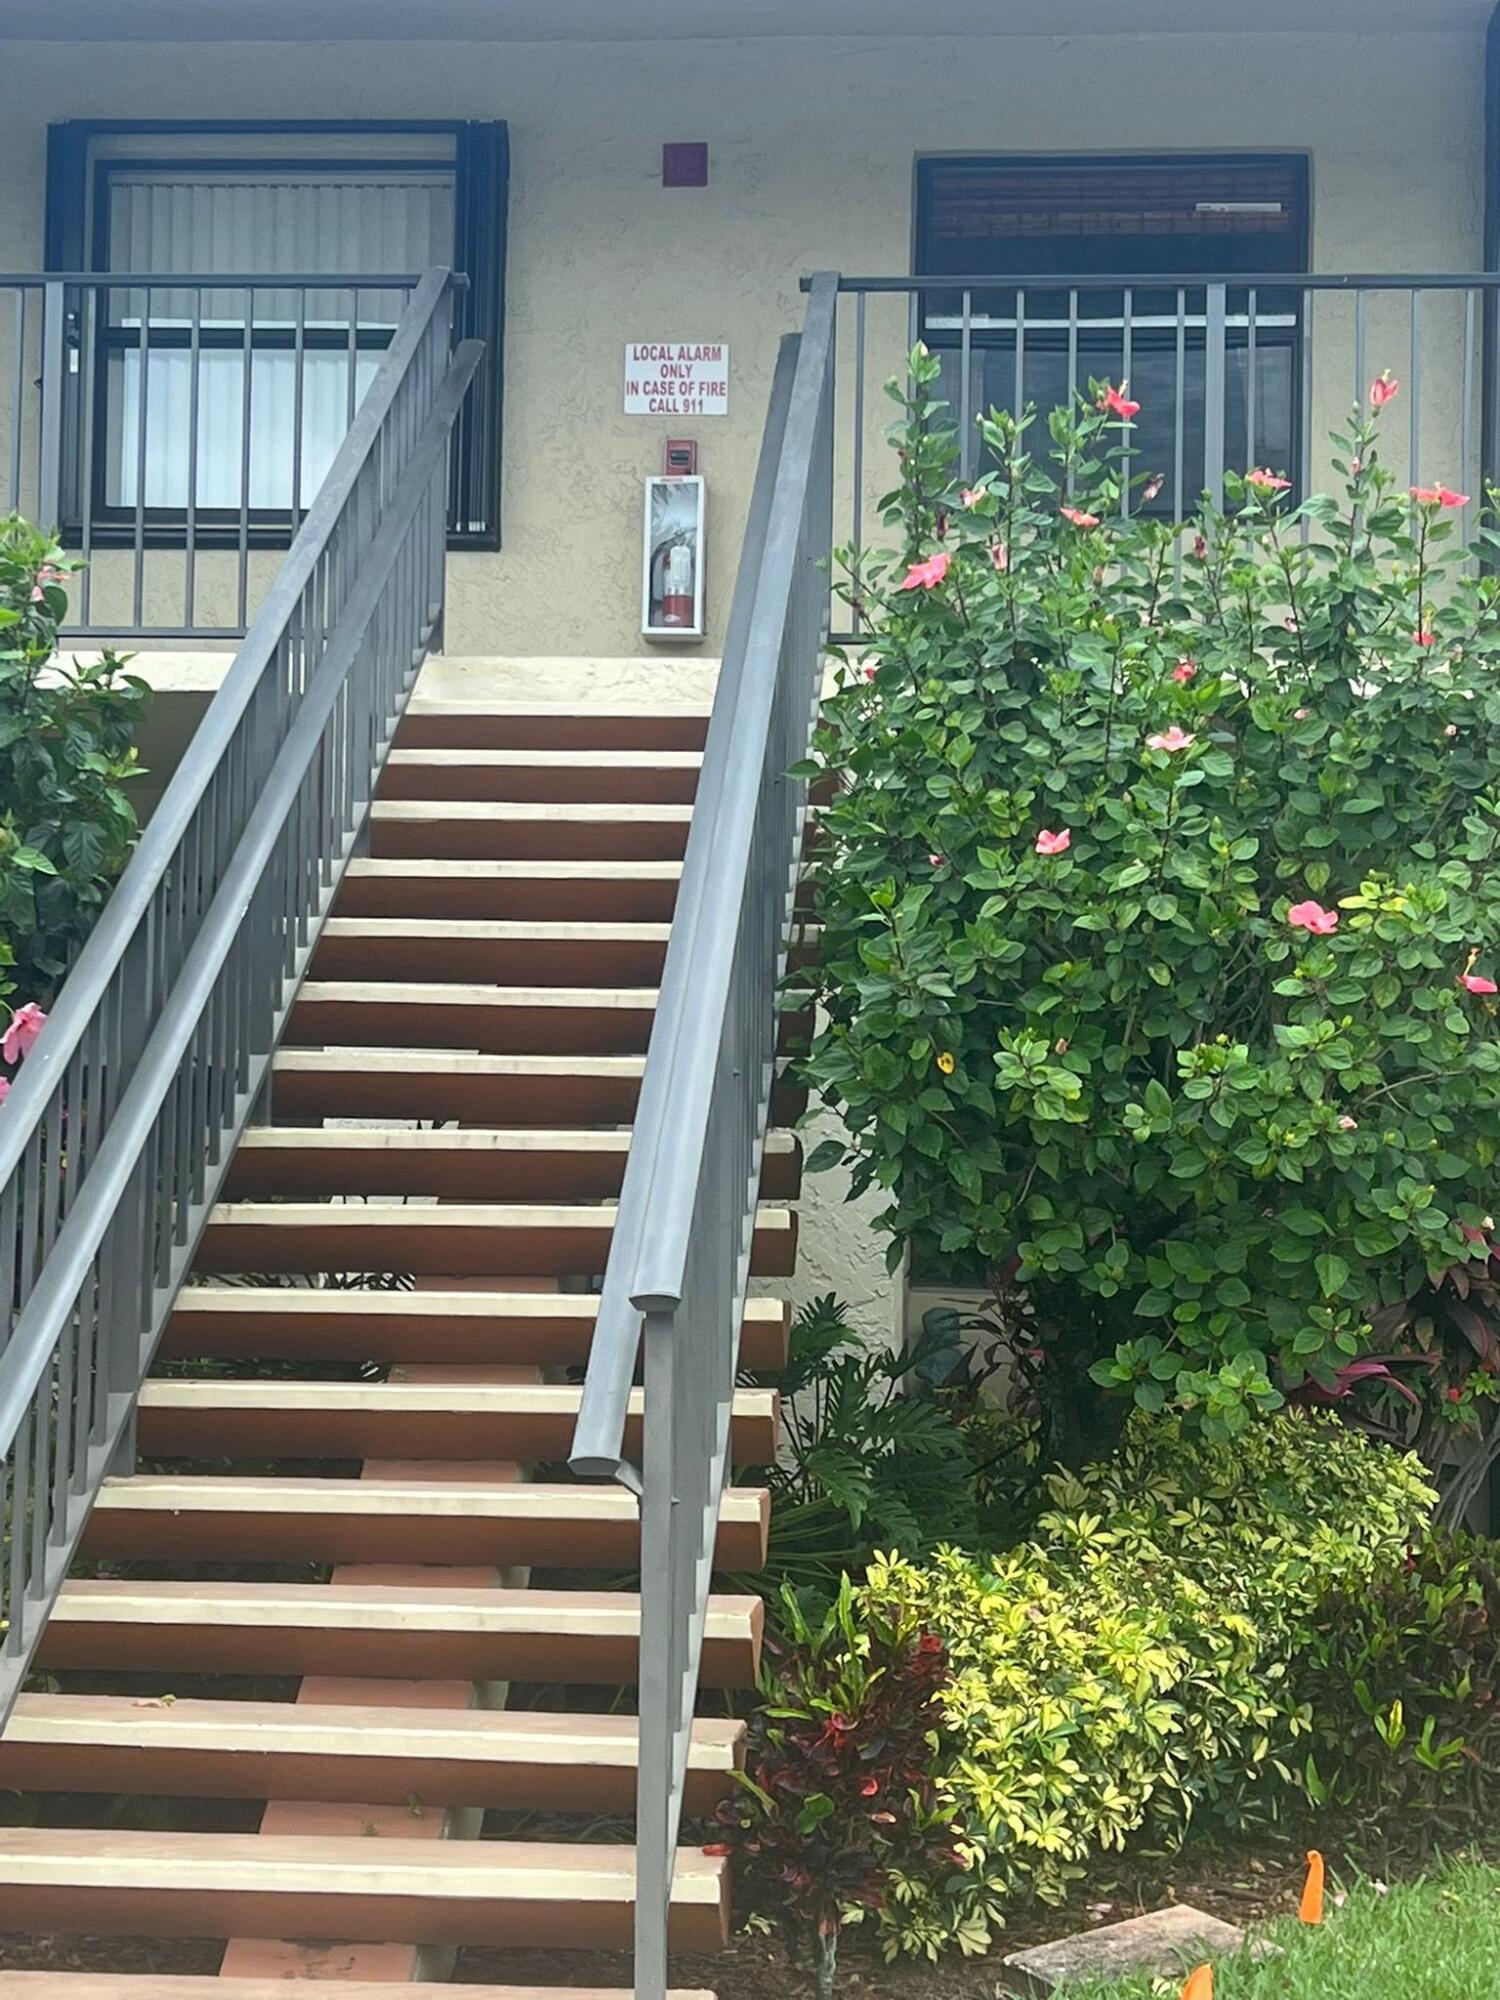 a view of stairs and flowers in front of house